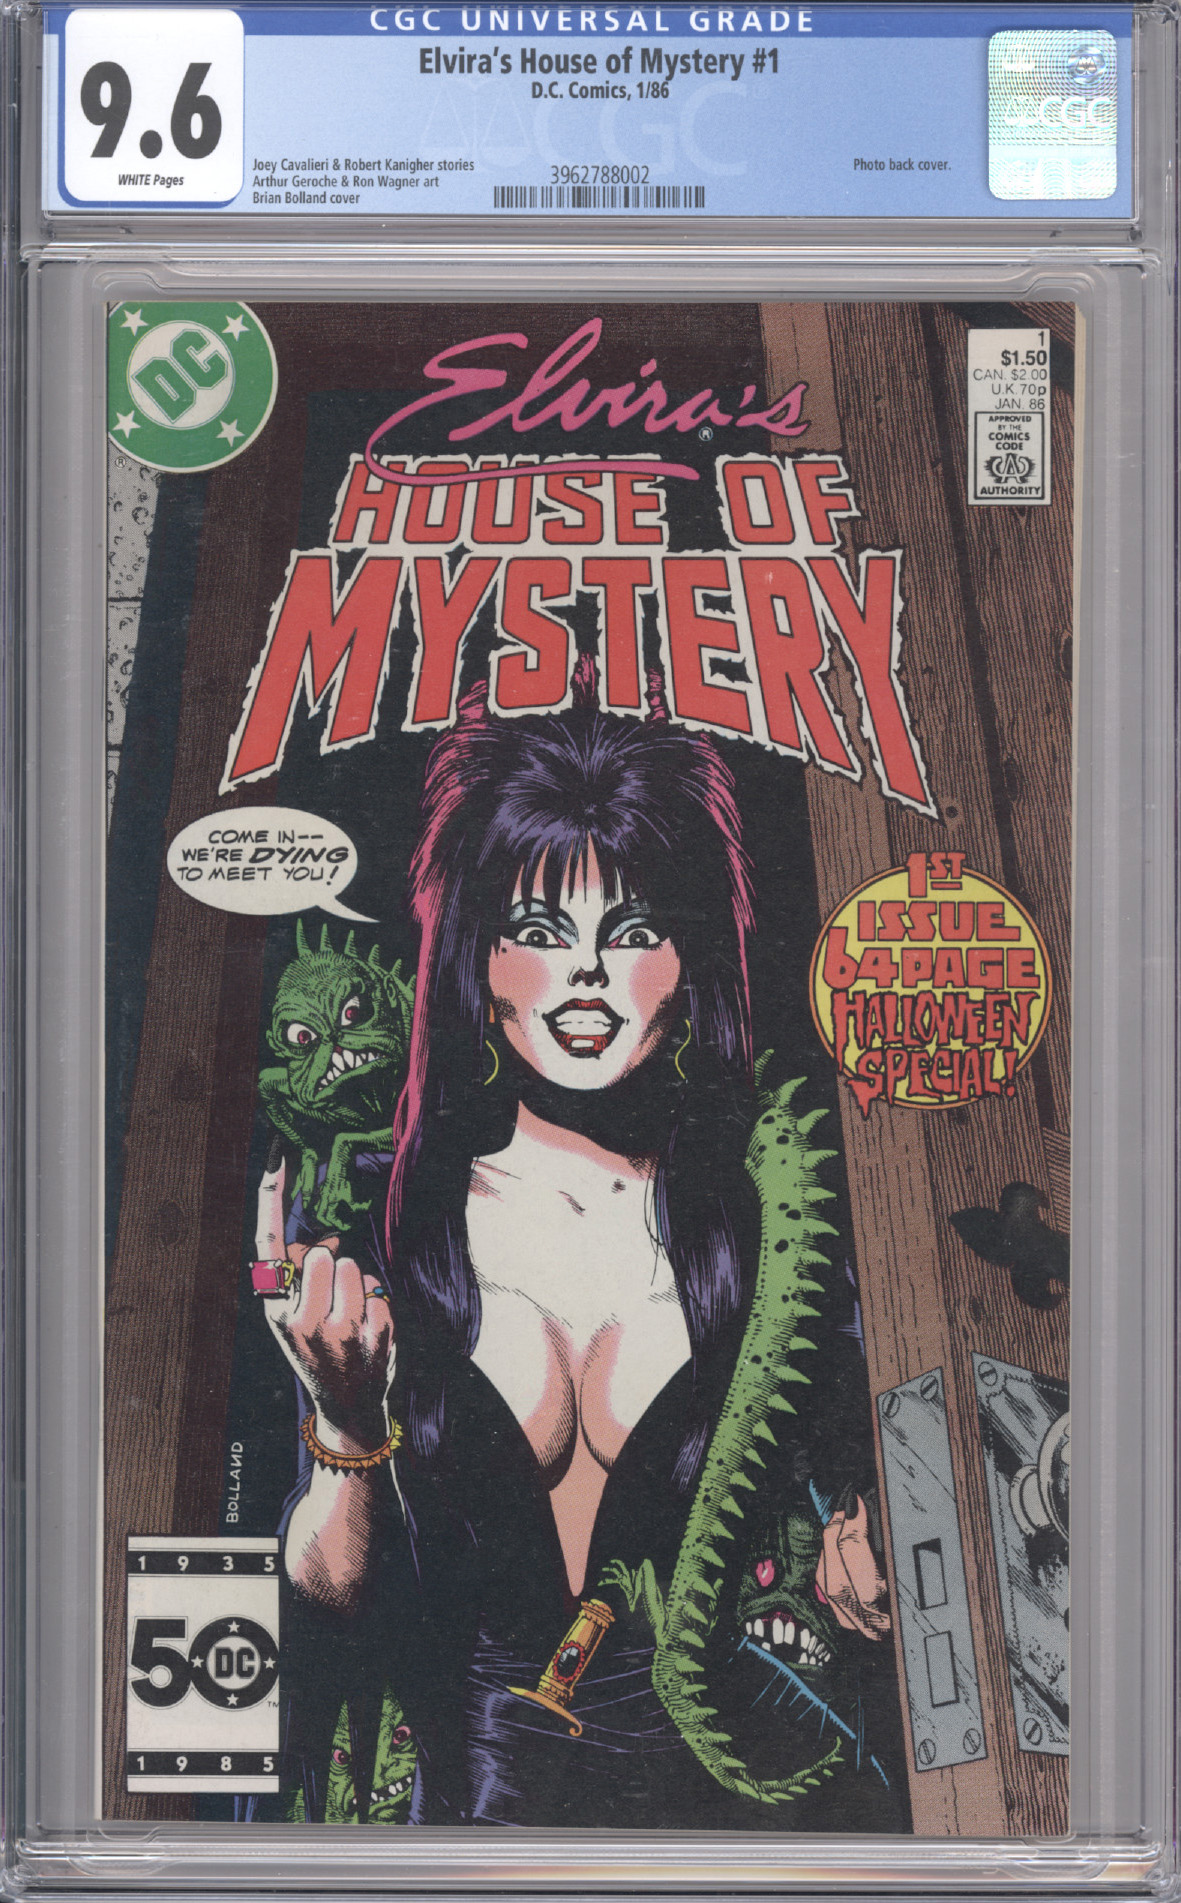 Elvira's House of Mystery #1 front